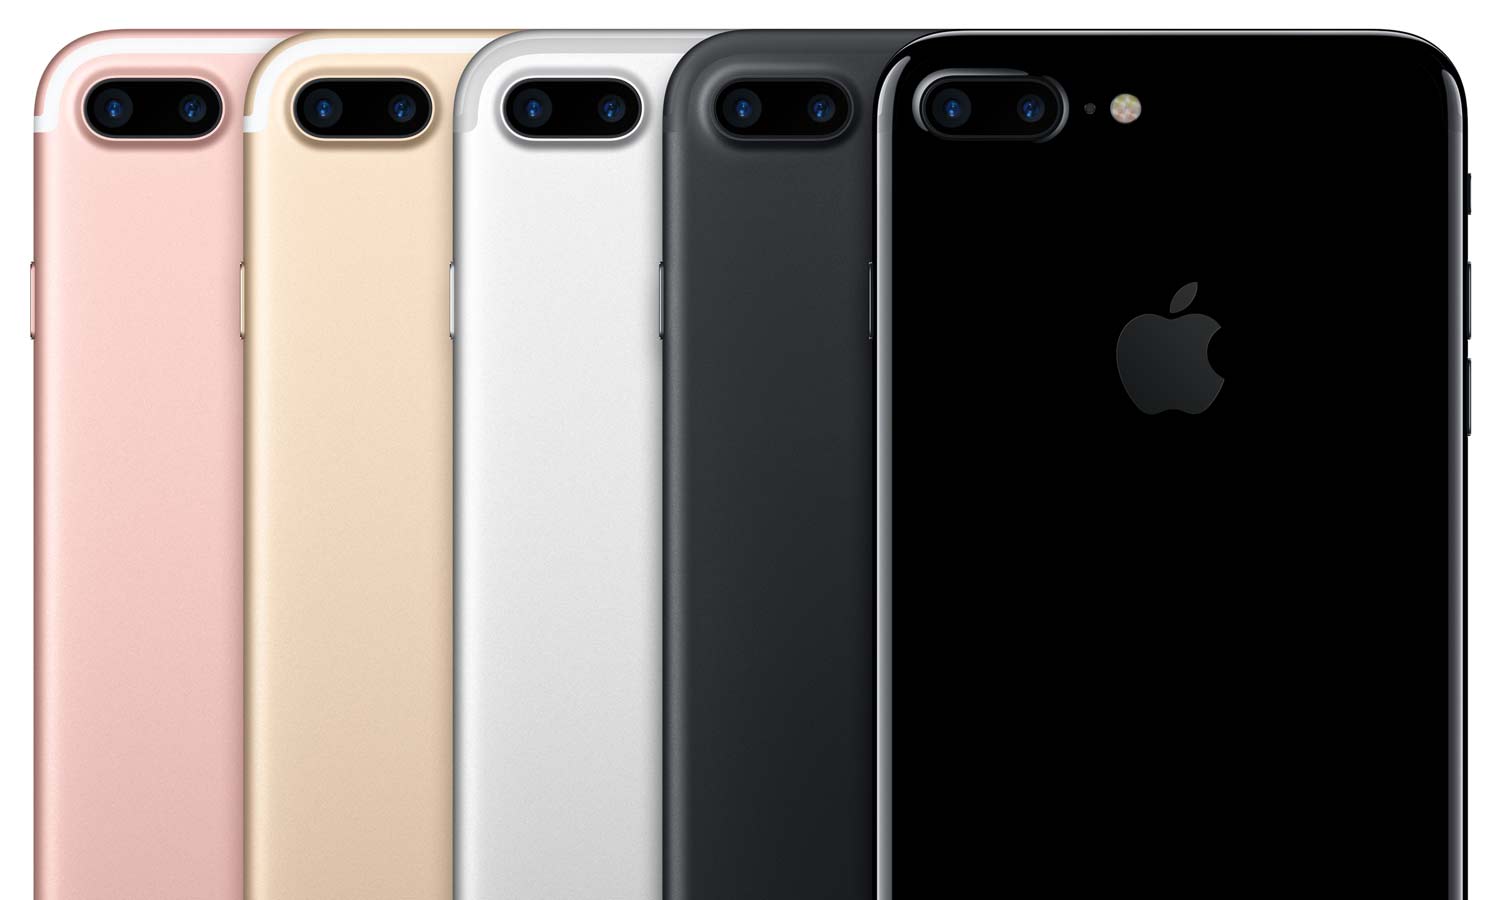 Onhandig Opstand Herhaald iPhone 7, 7 Plus vs iPhone 6s, 6s Plus: What Should You Buy? | Tom's Guide